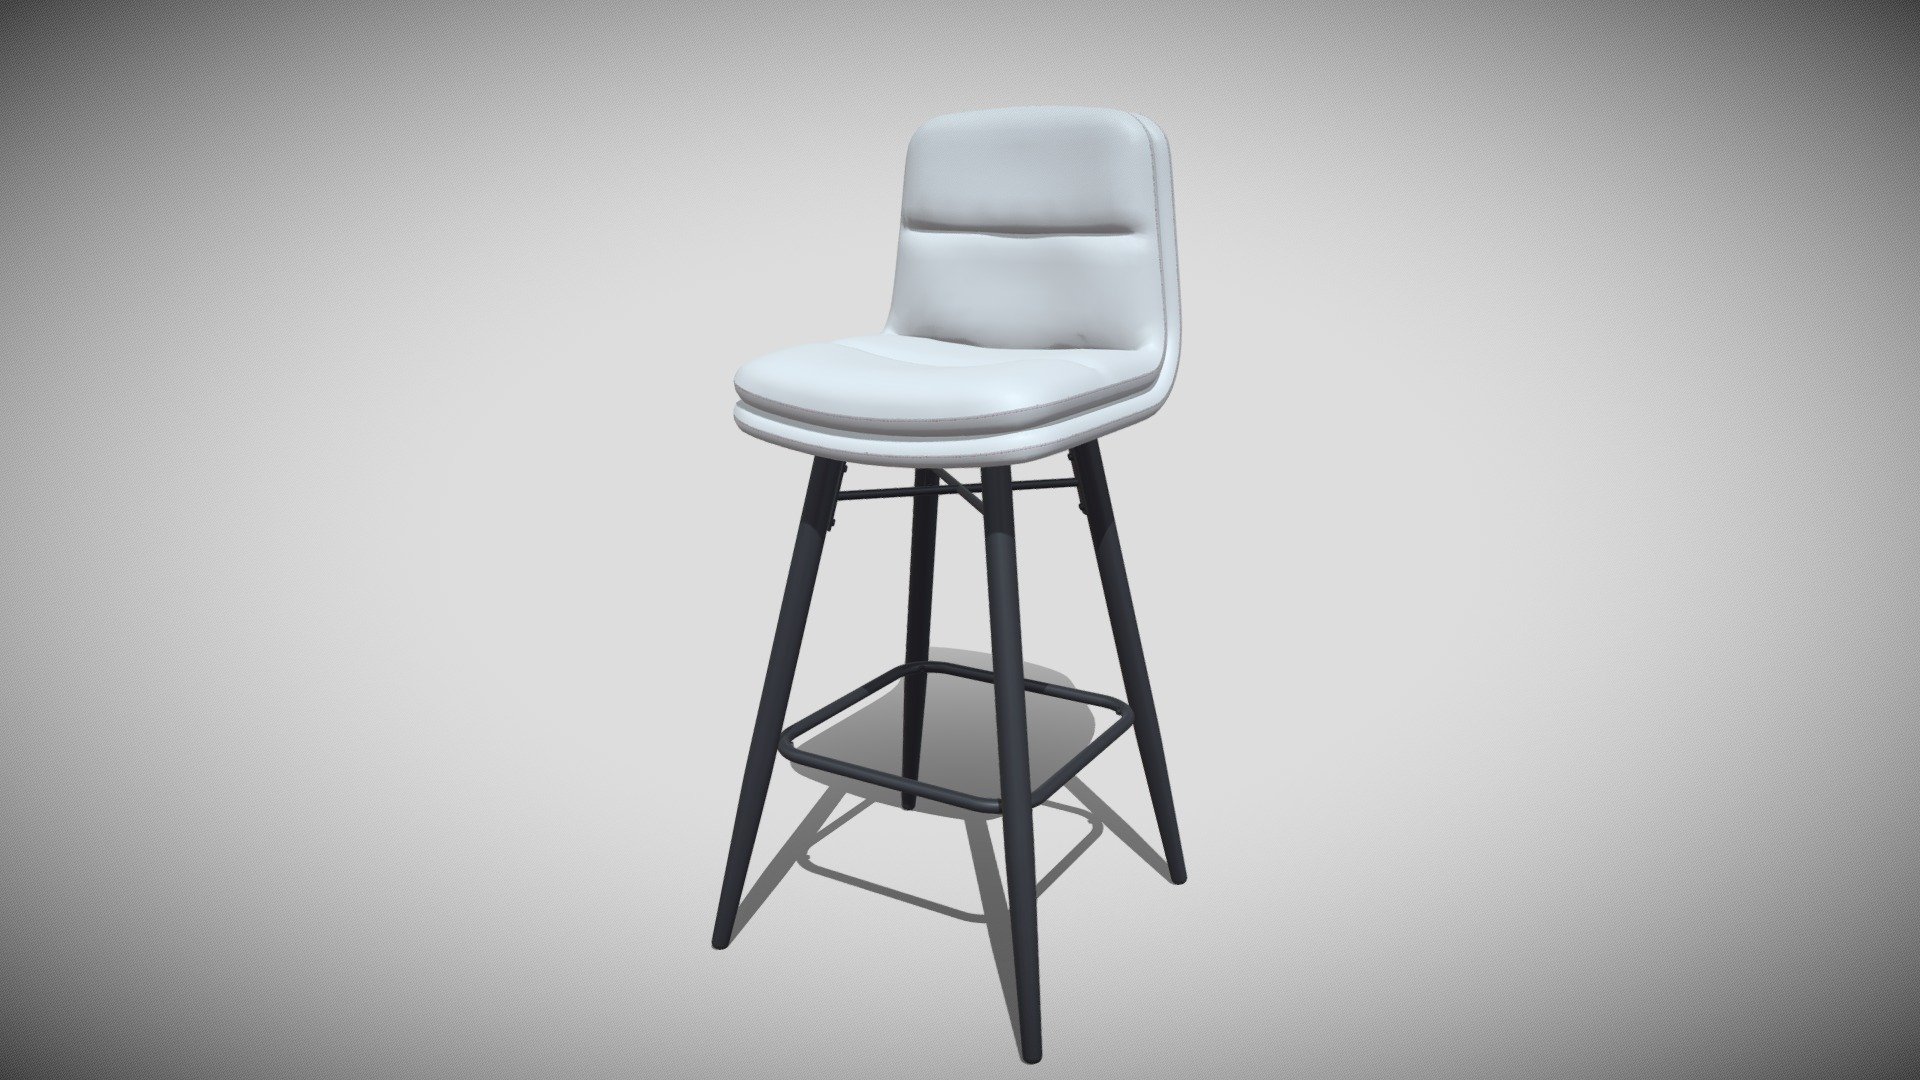 Detailed model of a Bar Stool, modeled in Cinema 4D.The model was created using approximate real world dimensions.

The model has 26,970 polys and 25,852 vertices.

The stitching geometry has also been included as a separate object in case you need it. It has 59,396 polys and 68,976 vertices.

An additional file has been provided containing the original Cinema 4D project files with both standard and v-ray materials, textures and other 3d export files such as 3ds, fbx and obj 3d model